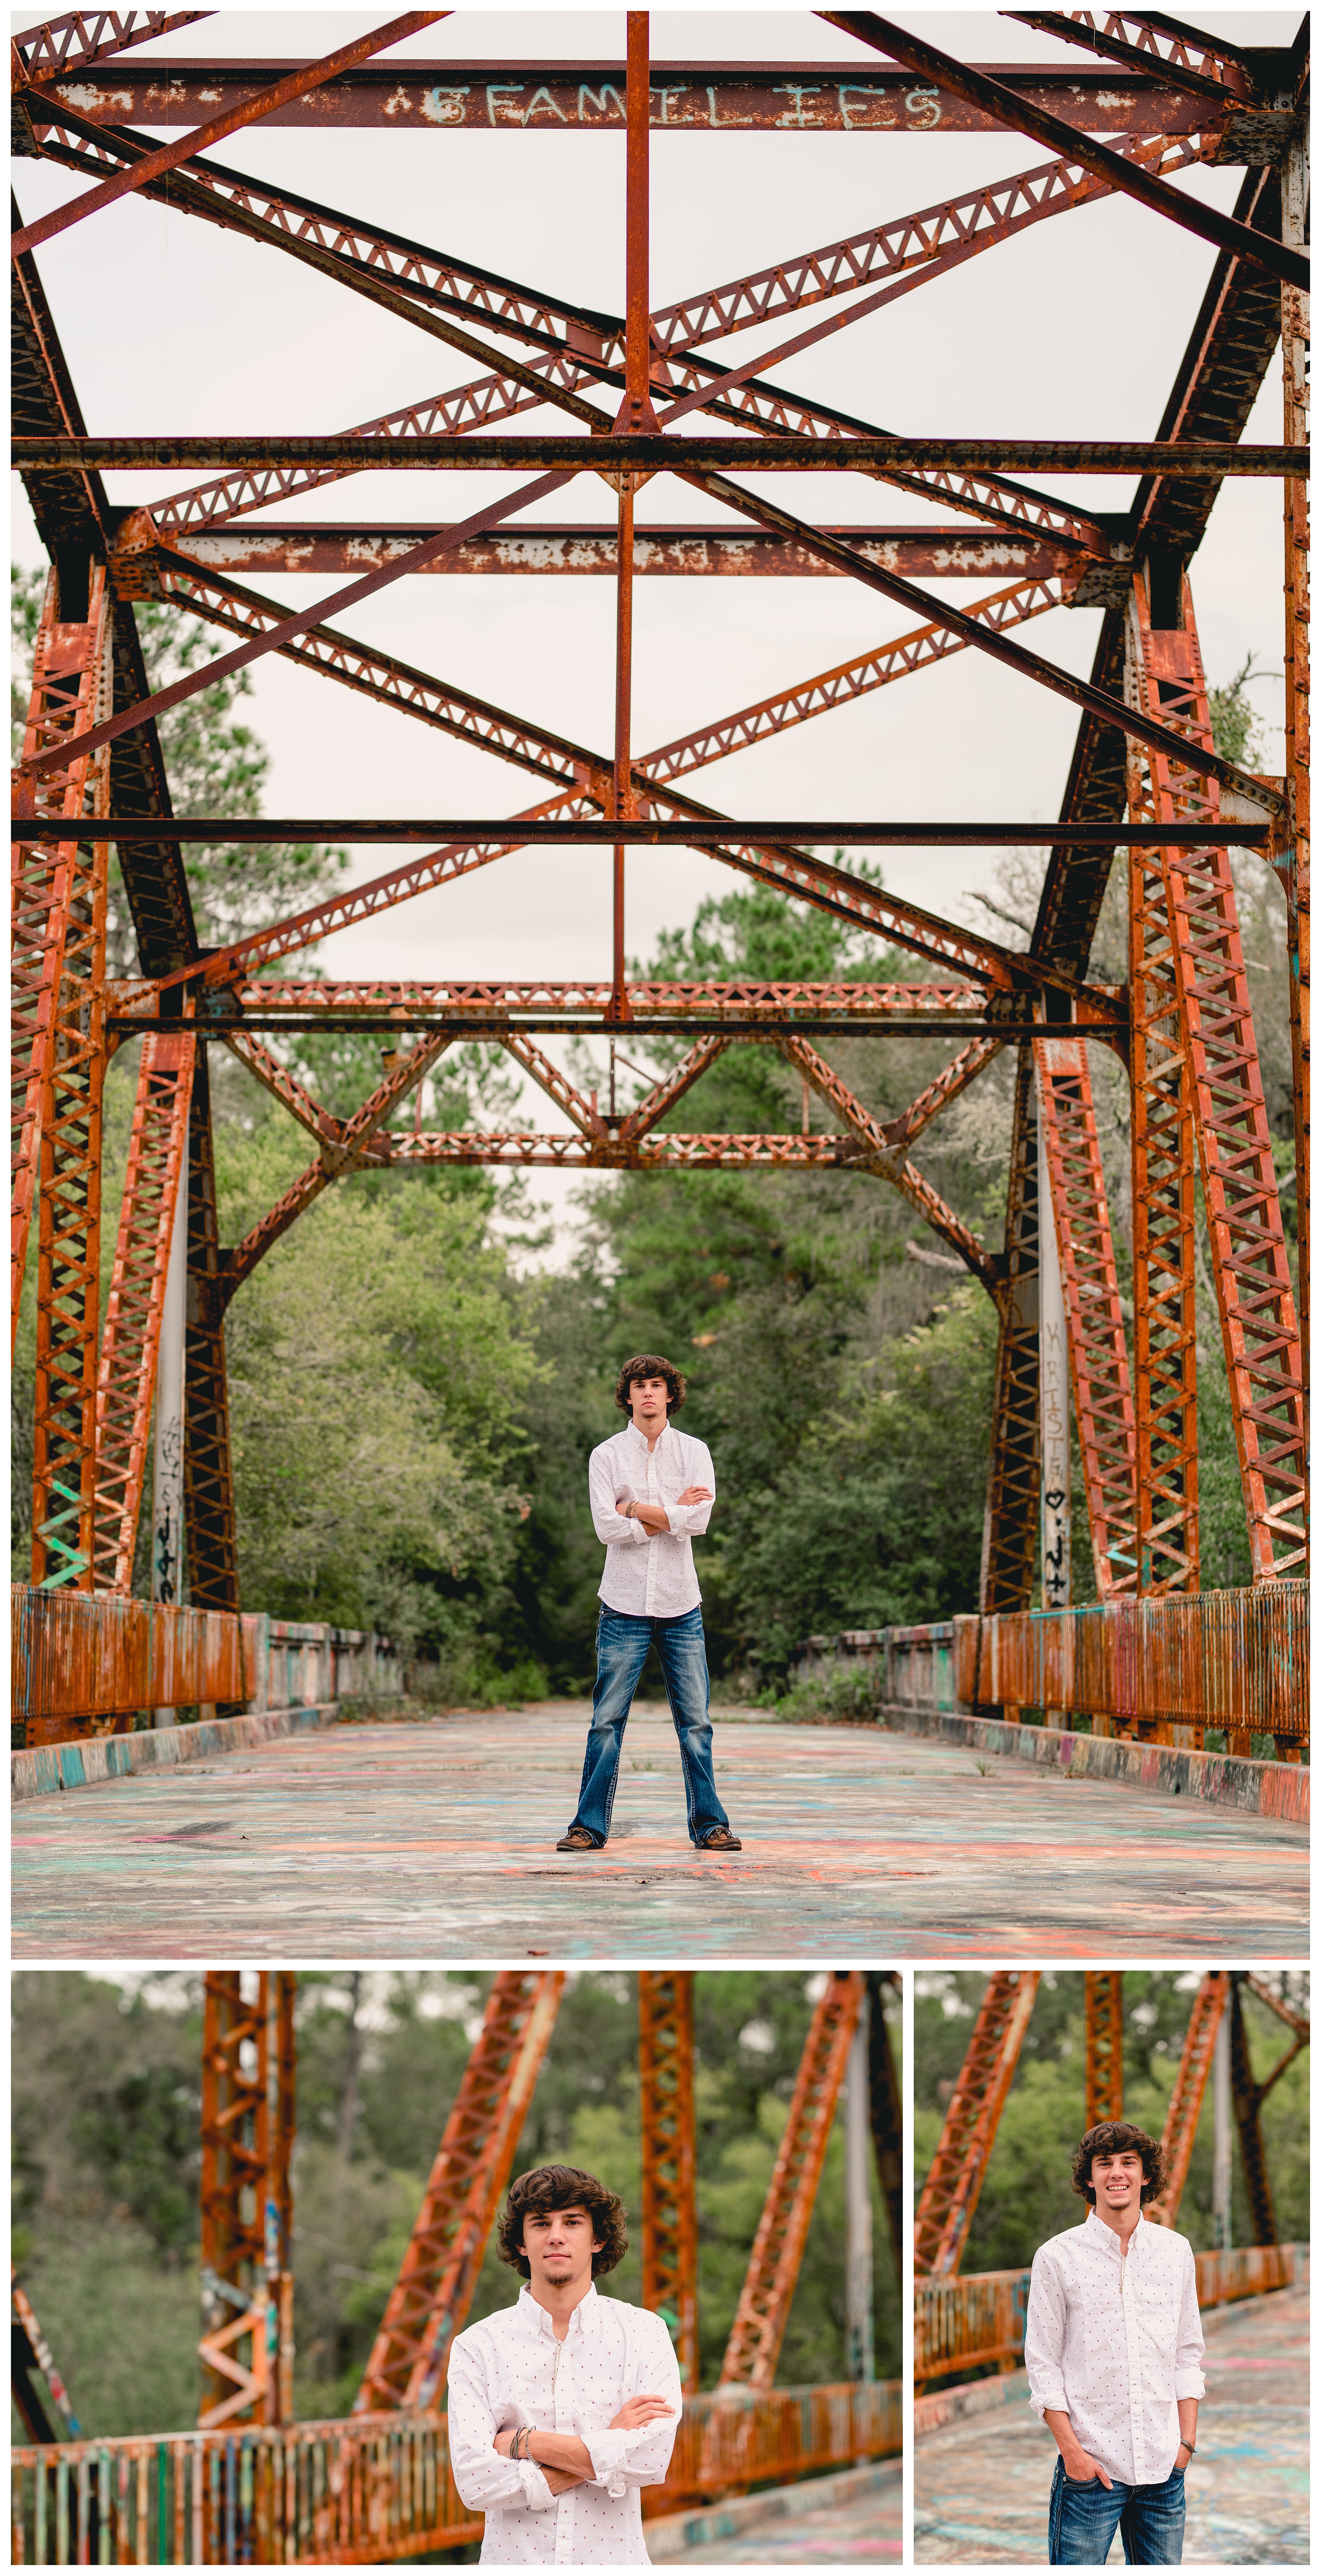 Old bridge in north florida used for senior boy portraits. Shelly Williams Photography